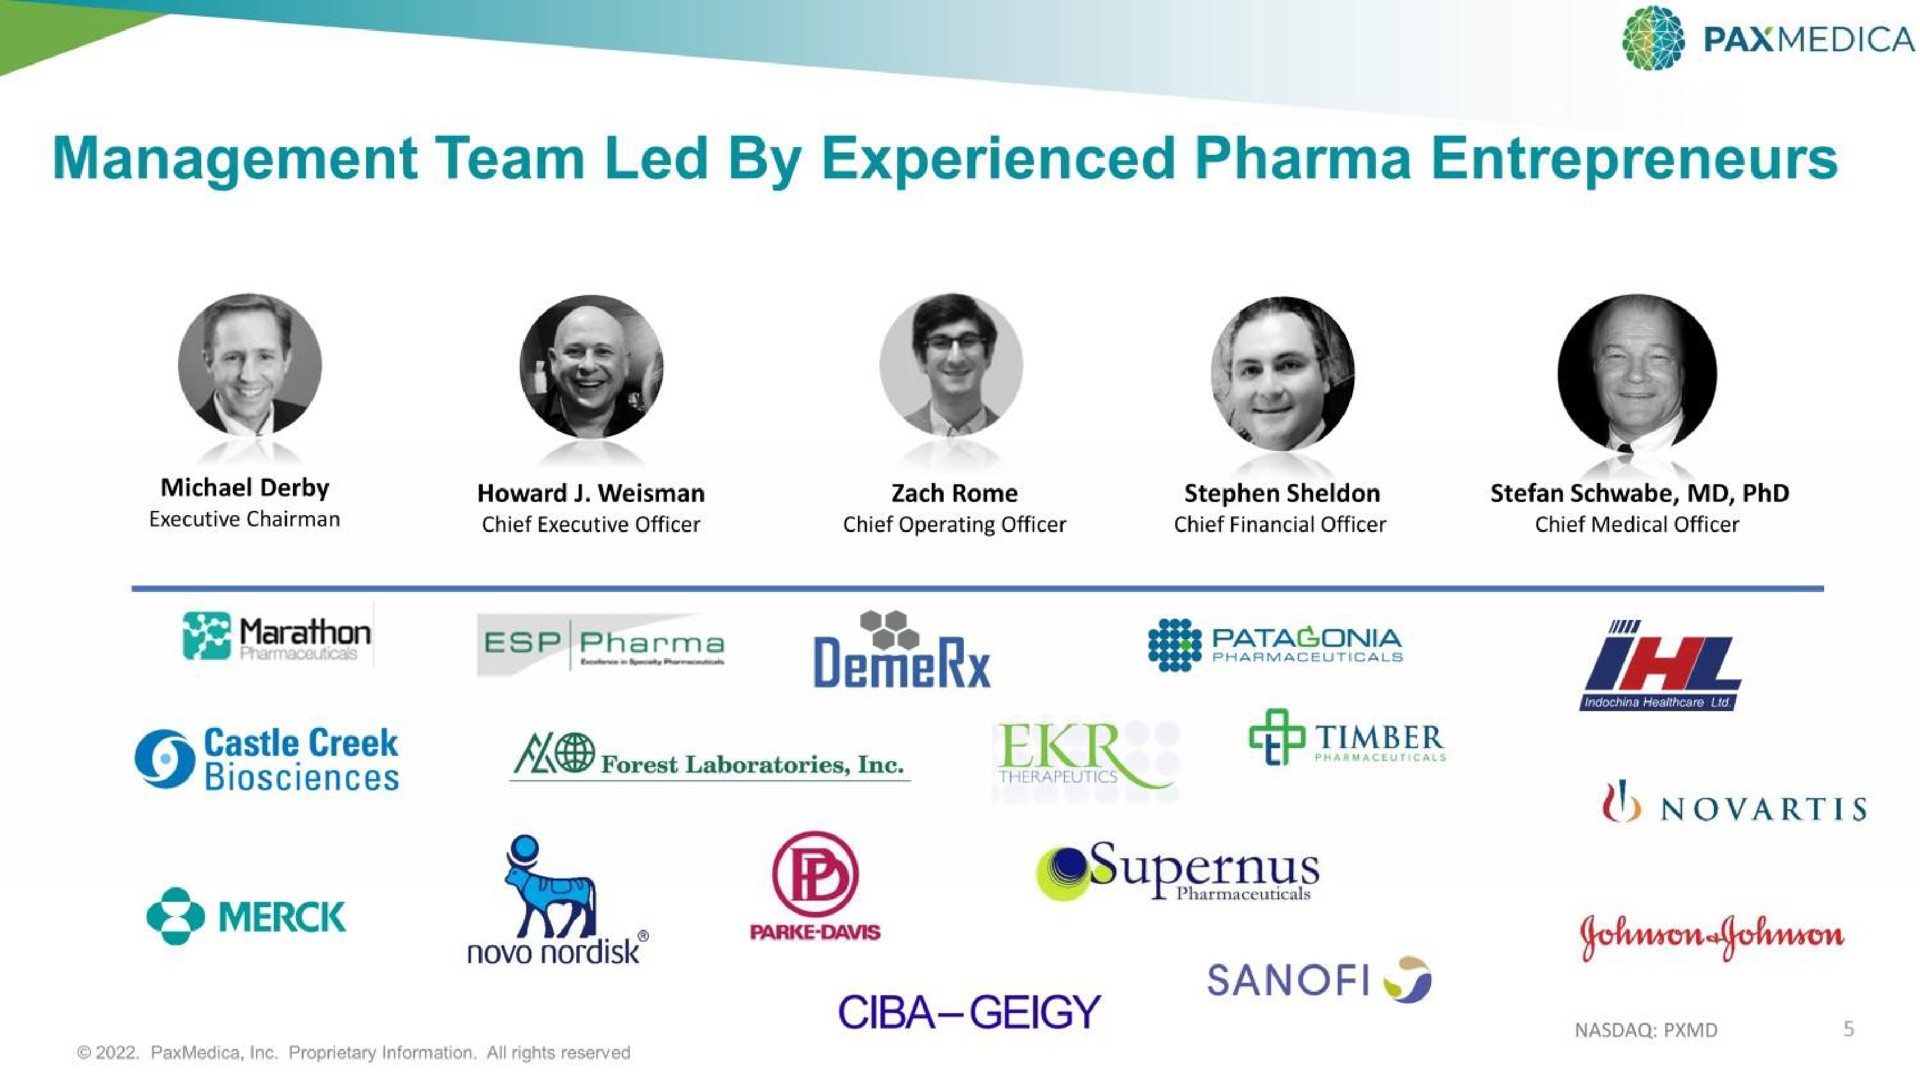 management team led by experienced entrepreneurs son | PaxMedica